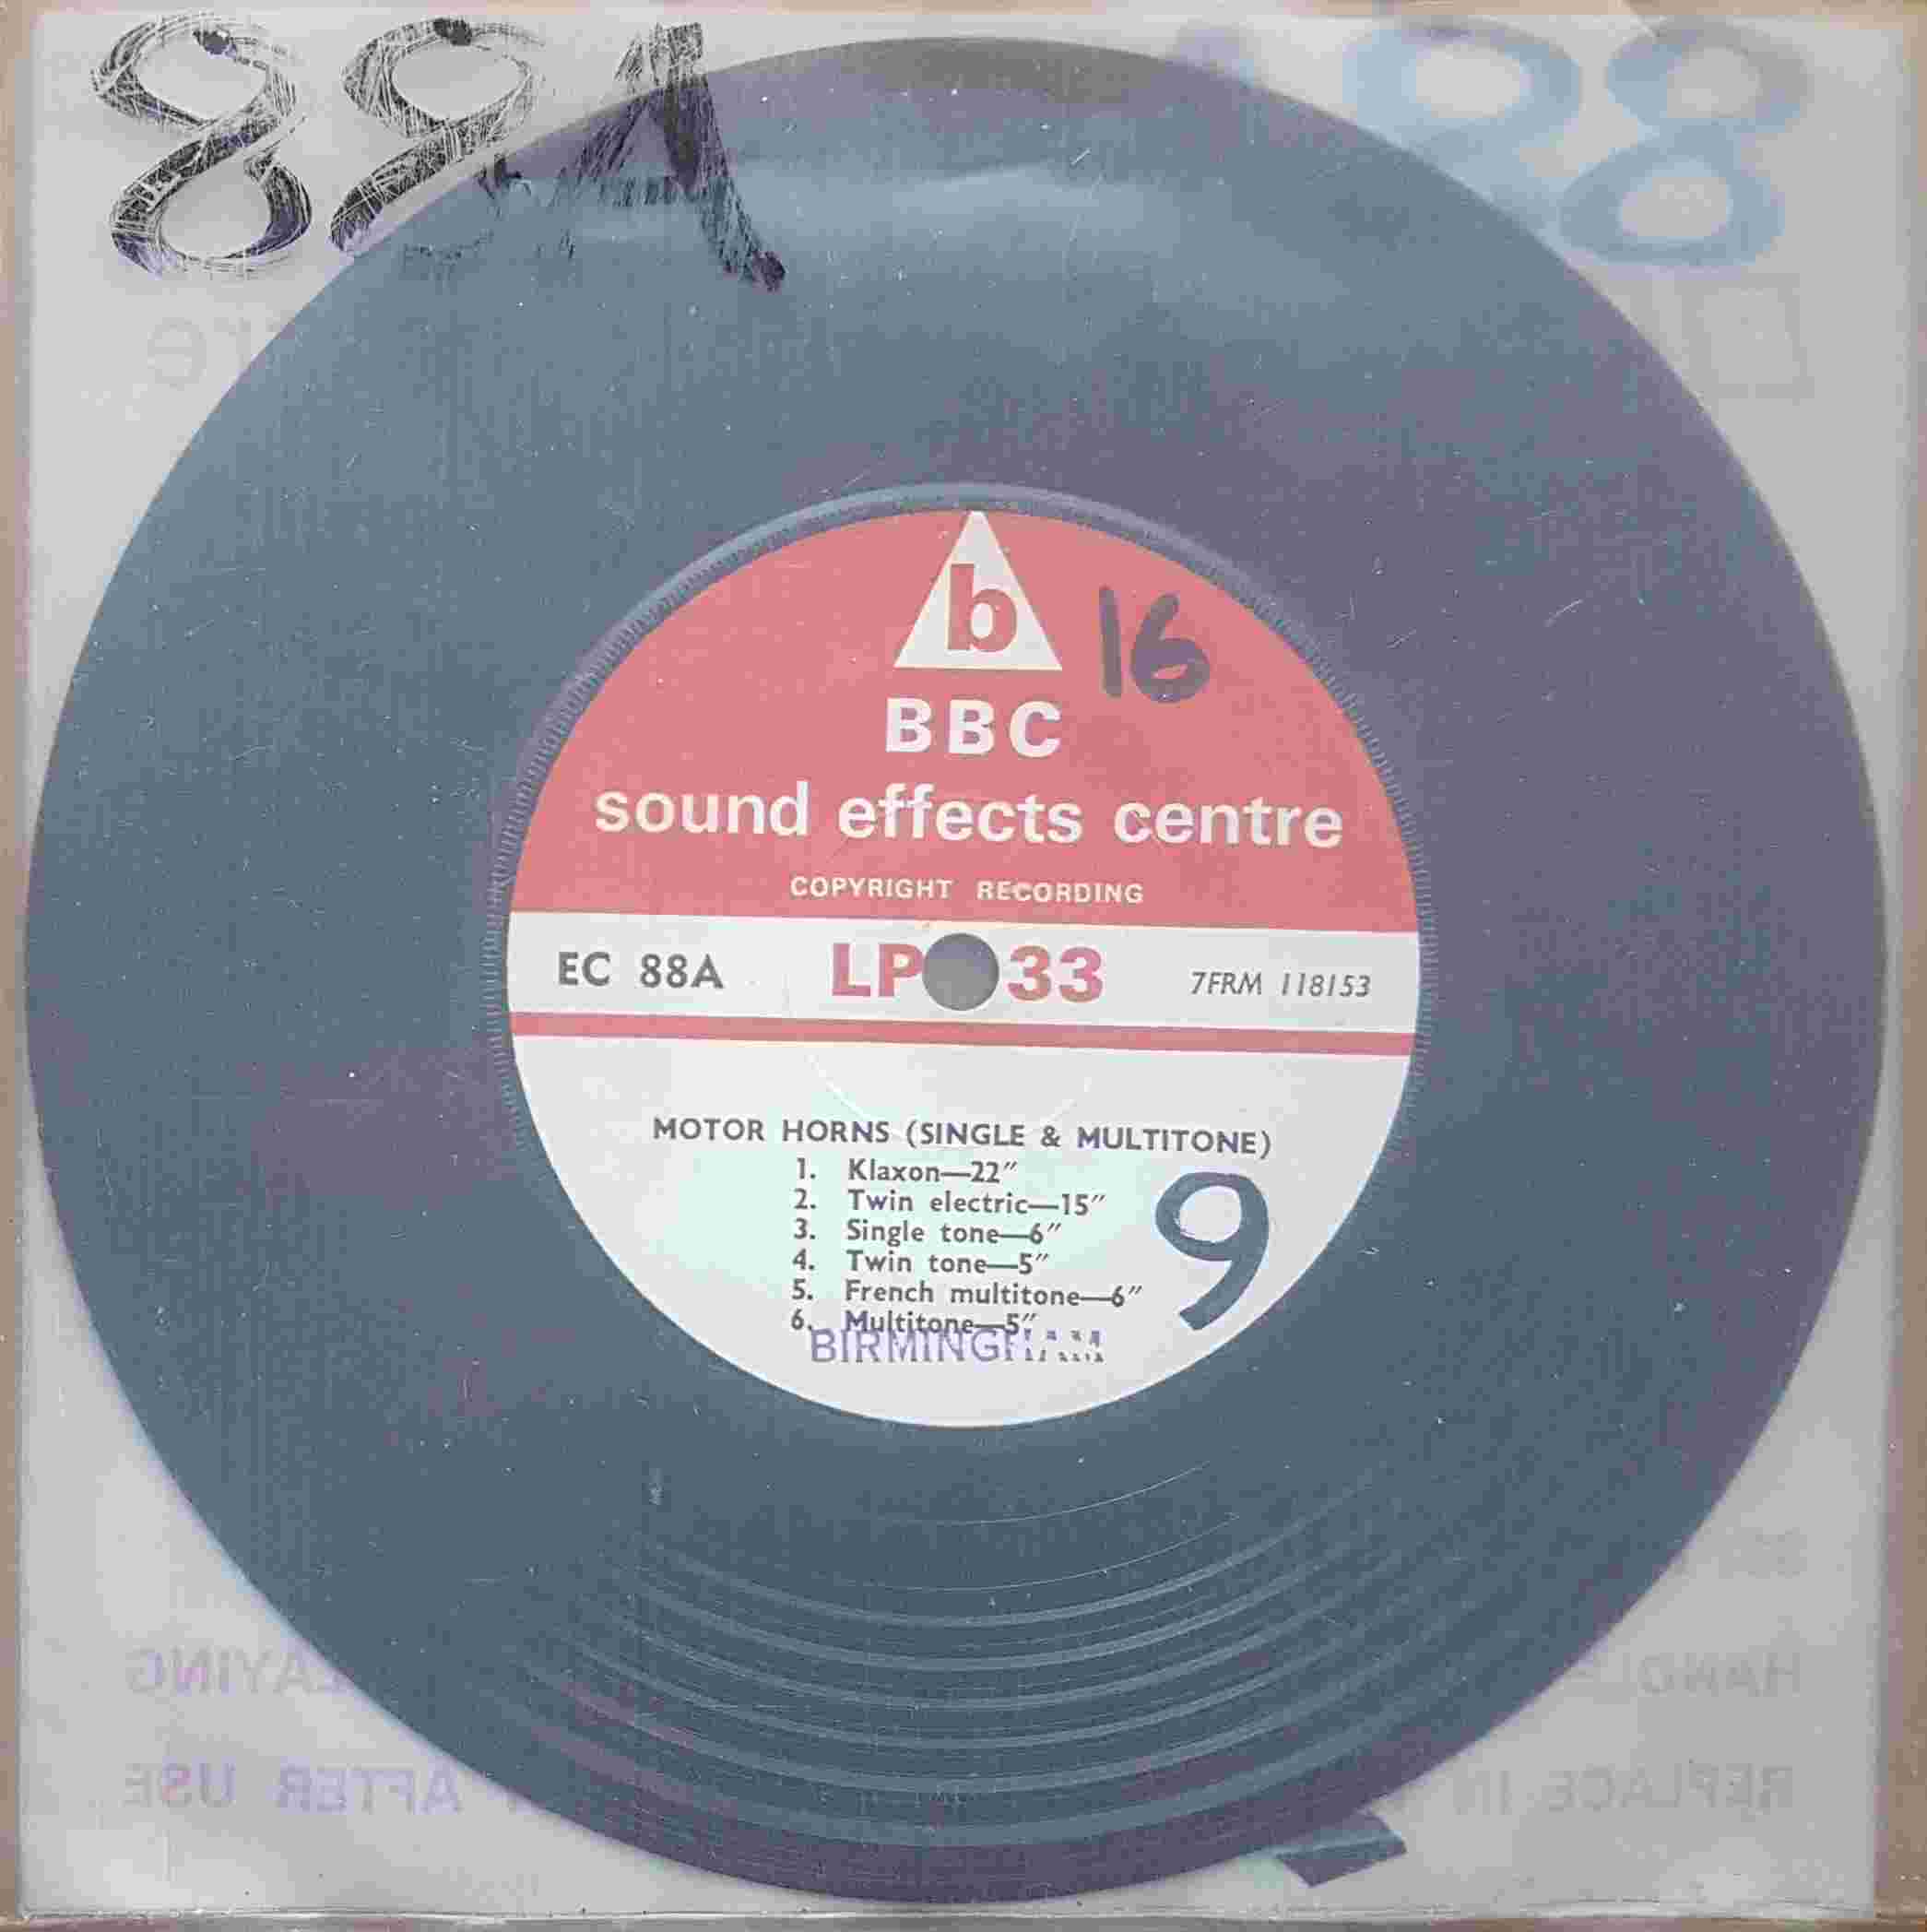 Picture of EC 88A Motor horns by artist Not registered from the BBC records and Tapes library